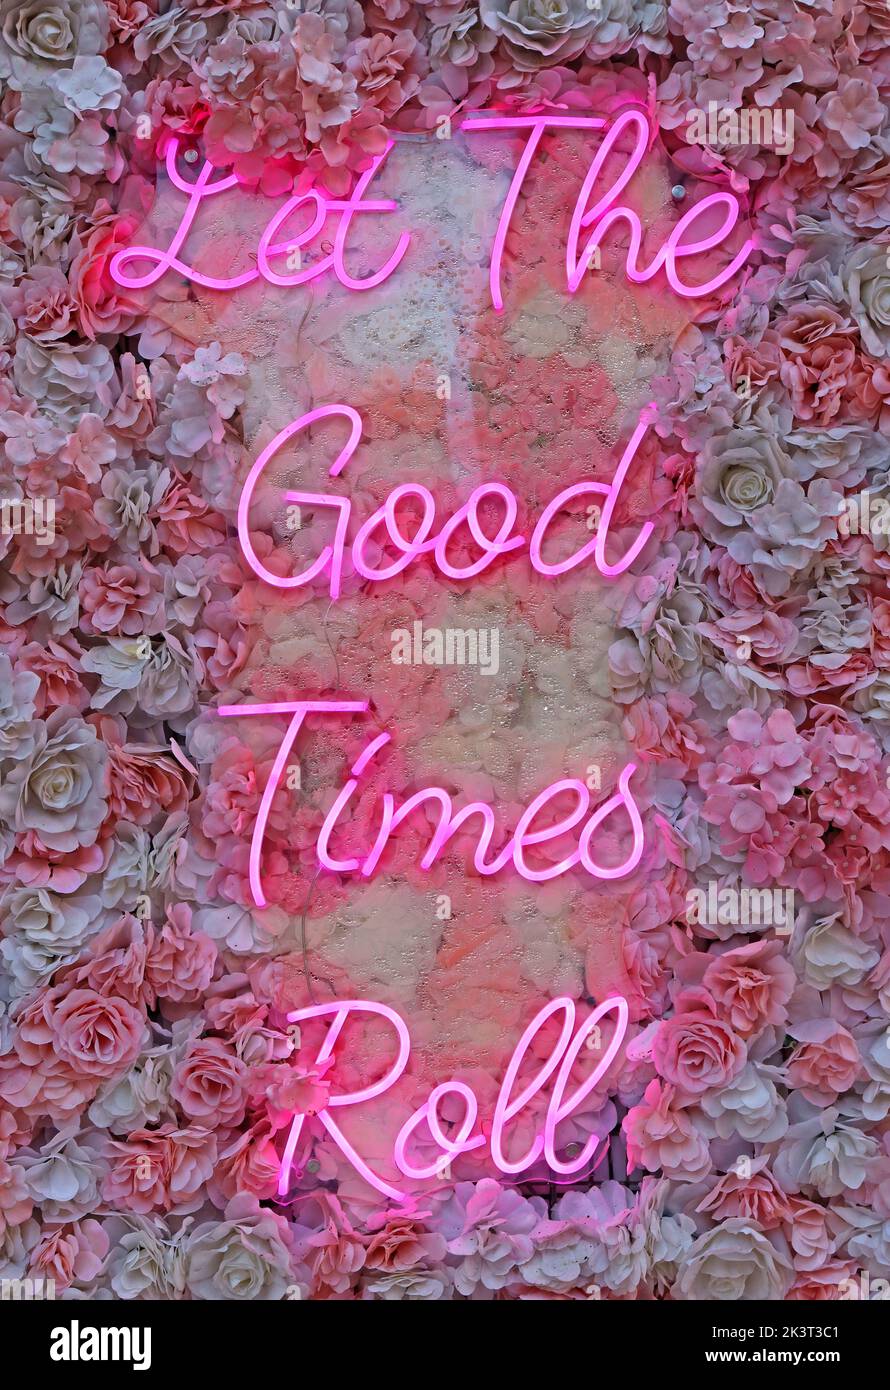 Let The Good Times Roll, pink neon sign on flowers Stock Photo